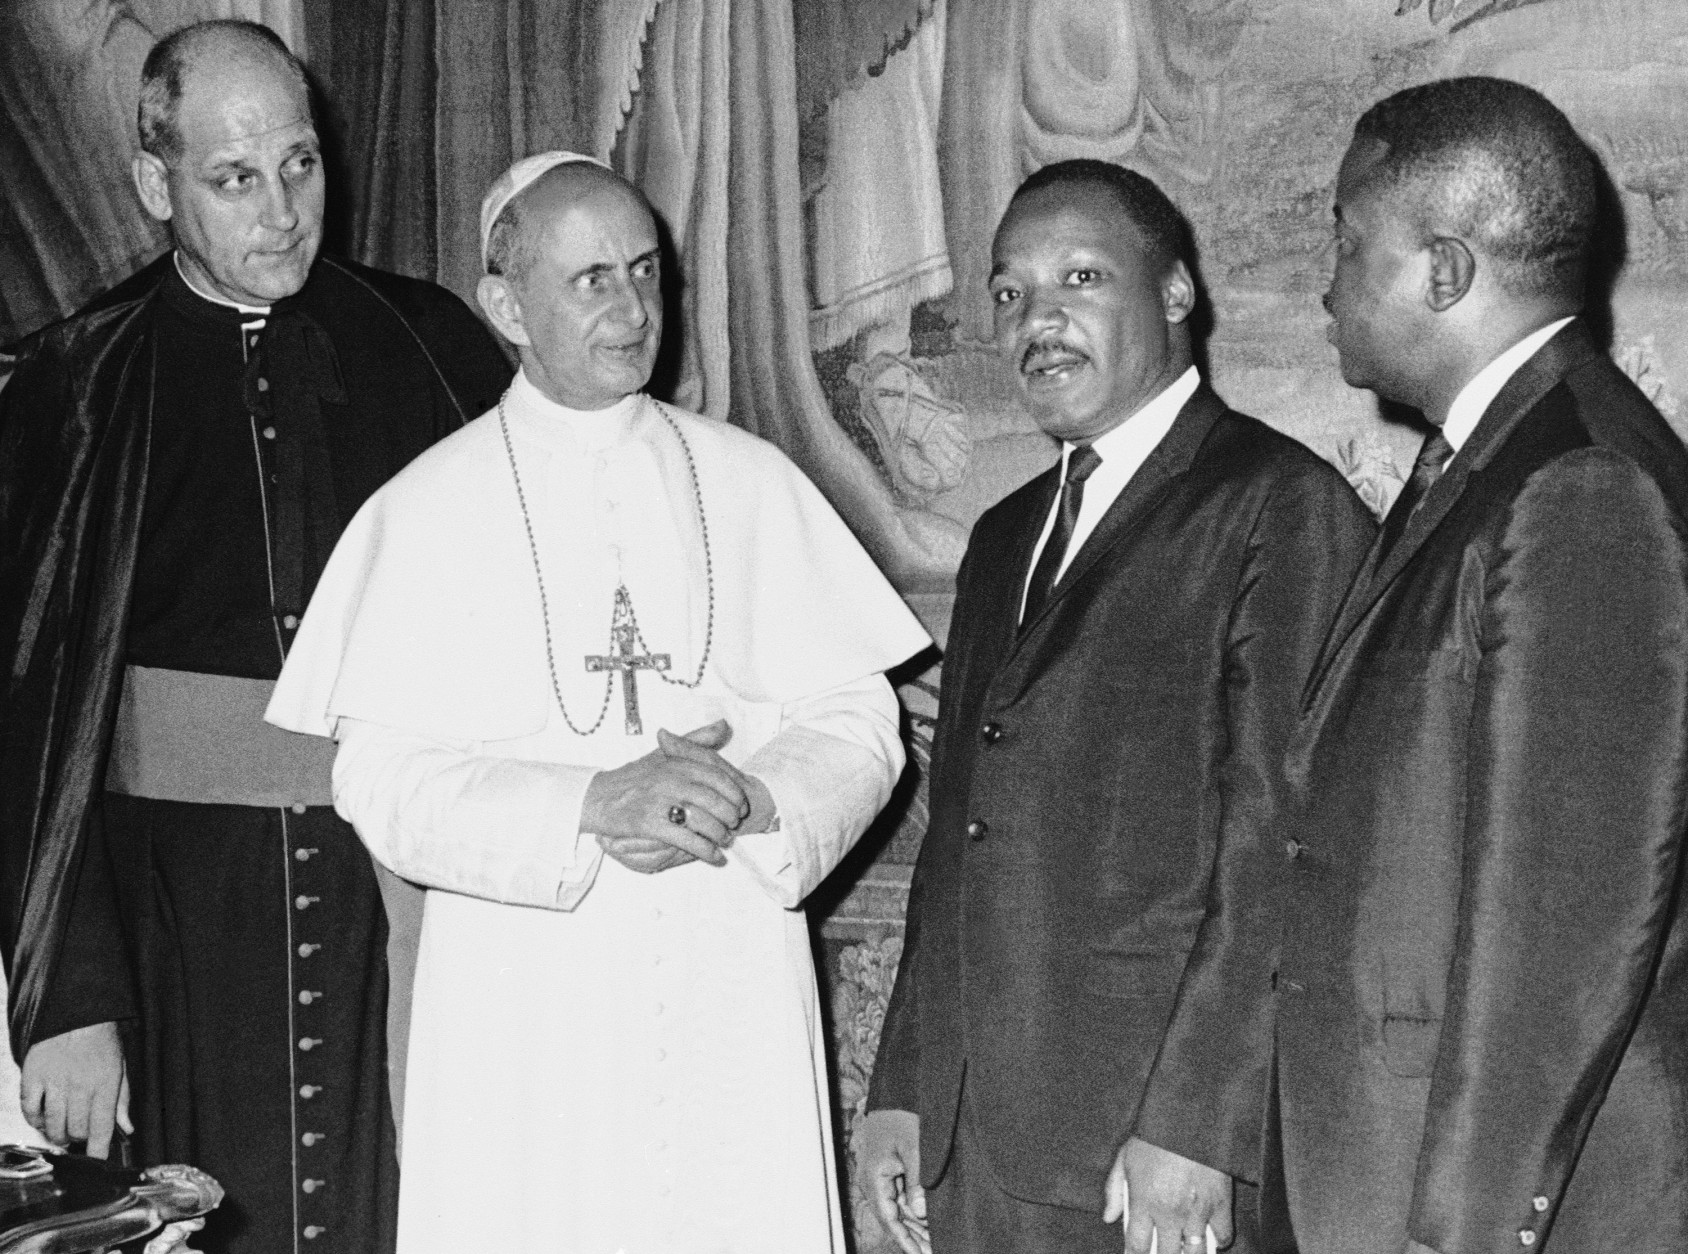 In his photo released by the Vatican, Pope Paul VI poses at the Vatican with American civil rights leader Dr. Martin Luther King, Jr., during a private audience, Sept. 18, 1964.  With the pontiff and King are Msgr. Paolo Marcinkus of Chicago, who acted as interpreter, and with King is his aide, Dr. Ralph Abernathy, right. (AP Photo/Vatican Photo)